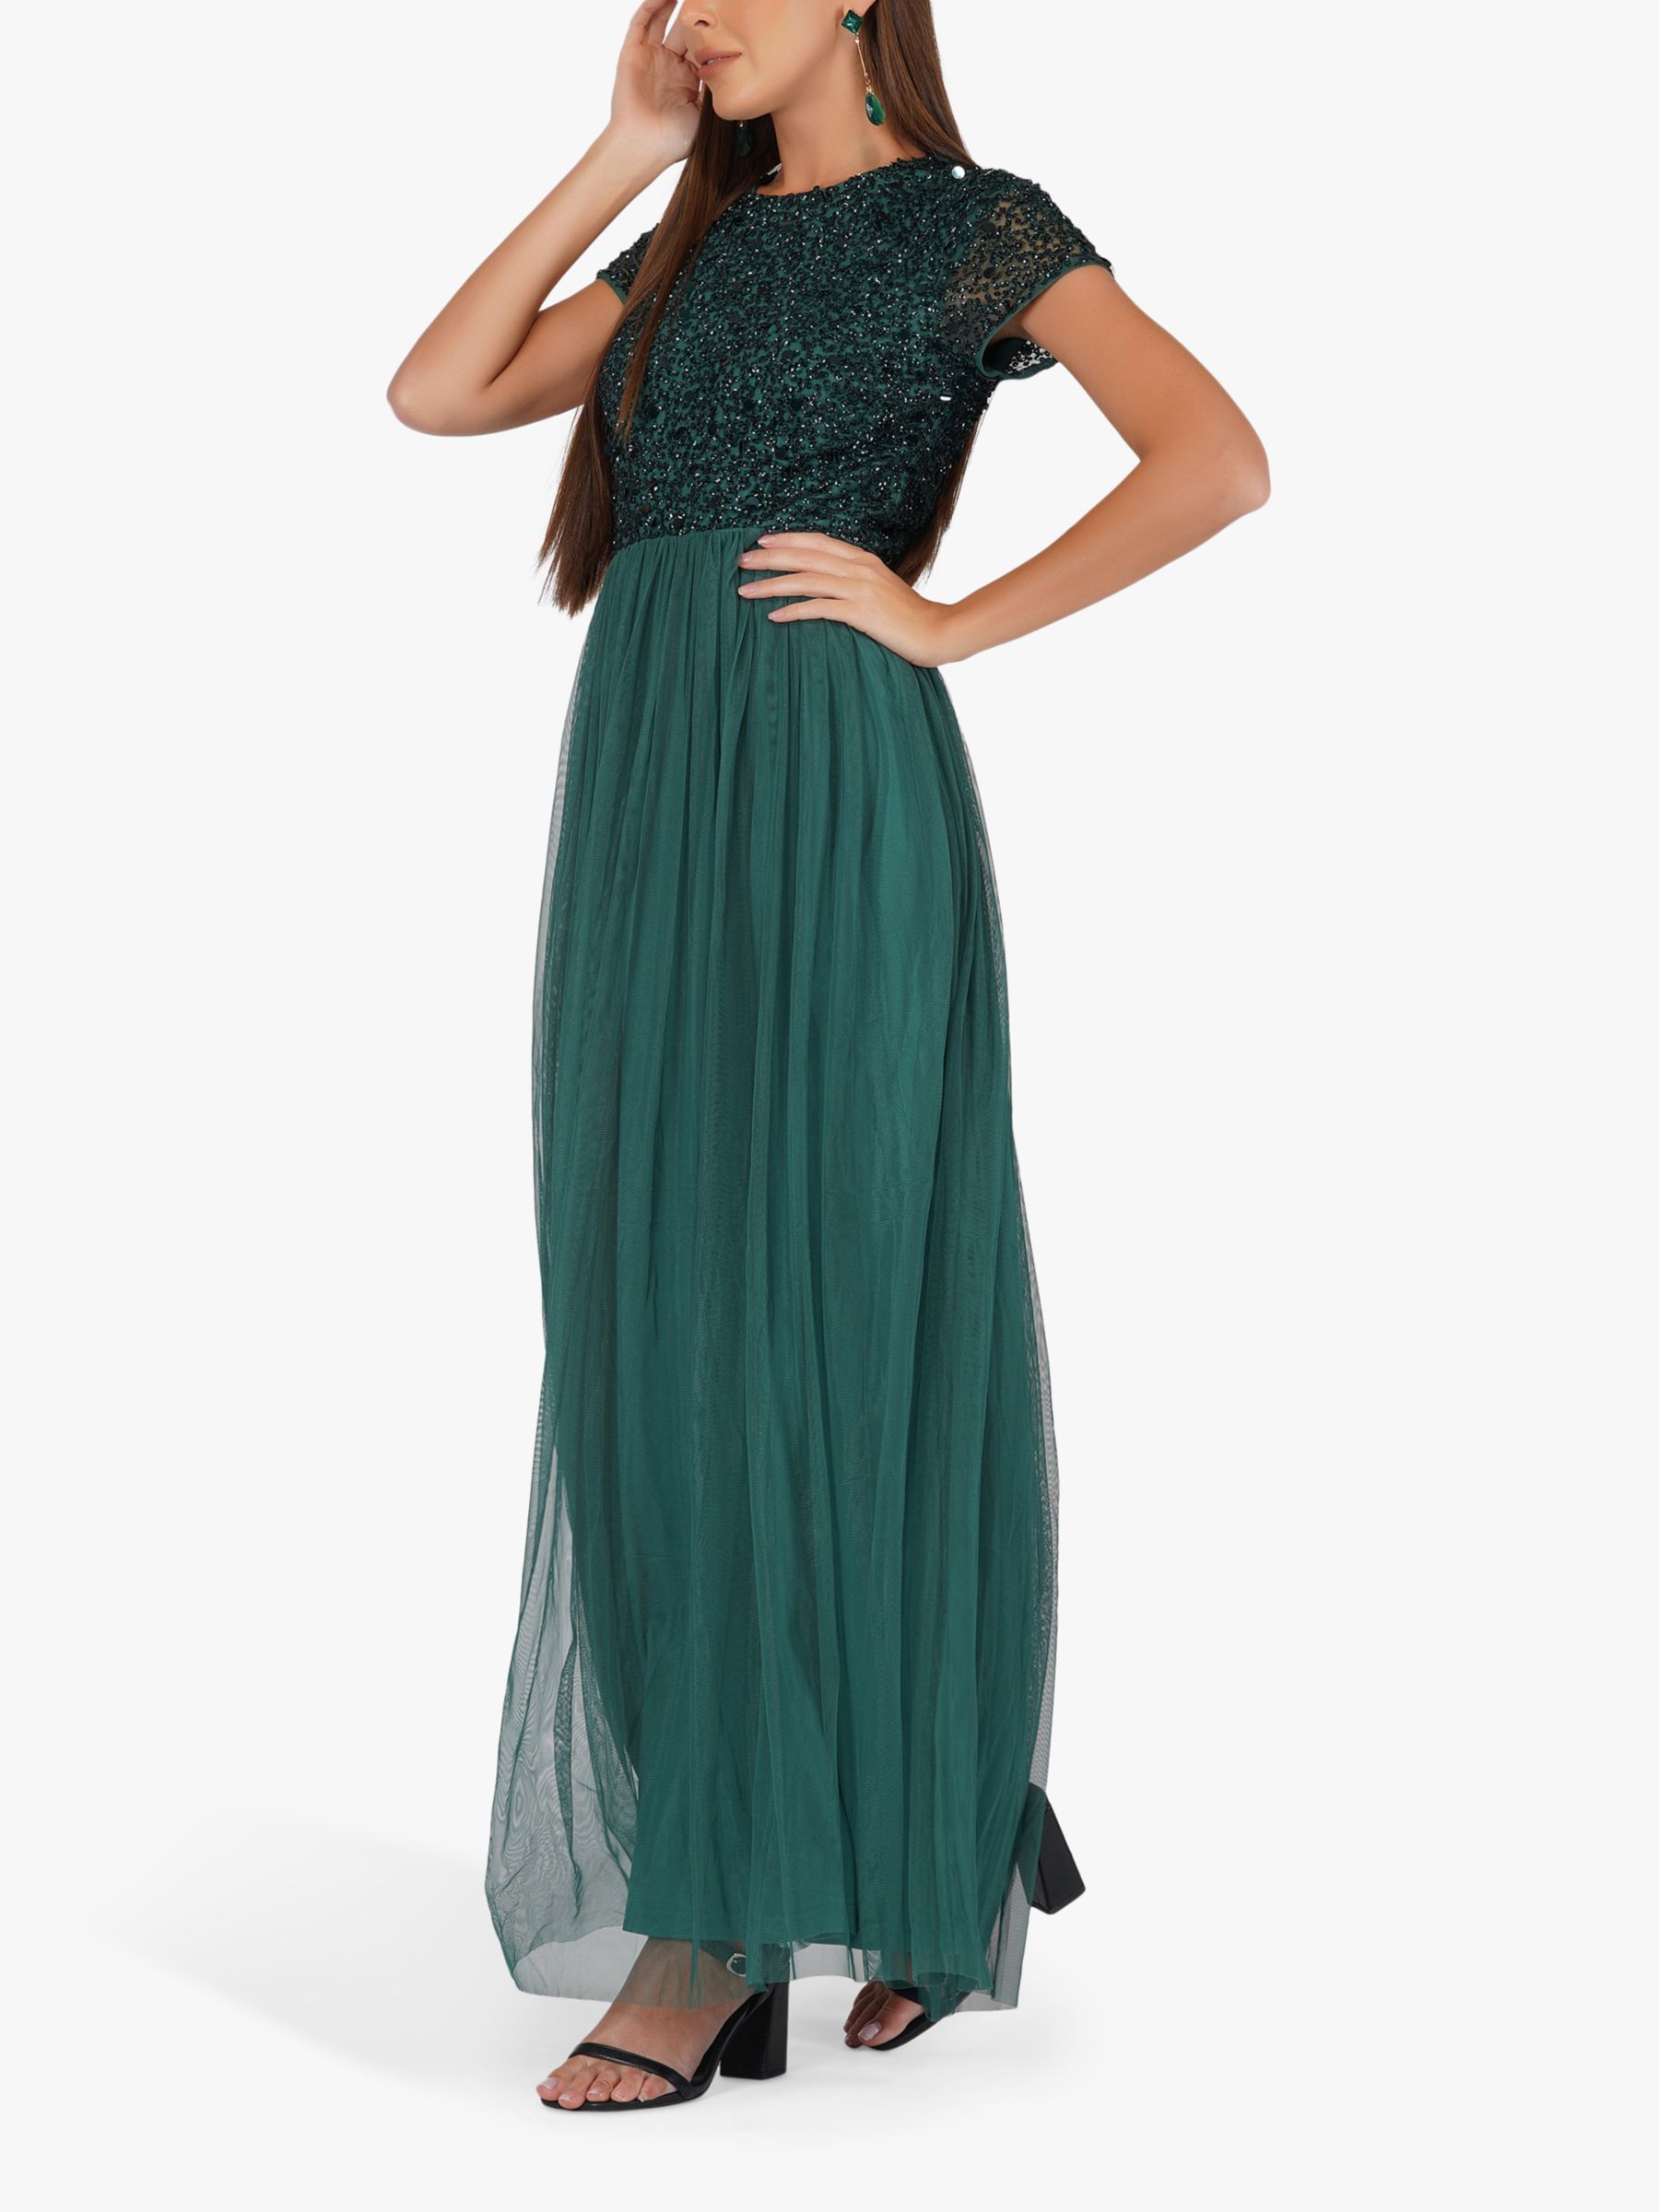 Buy Lace & Beads Picasso Embellished Bodice Maxi Dress Online at johnlewis.com